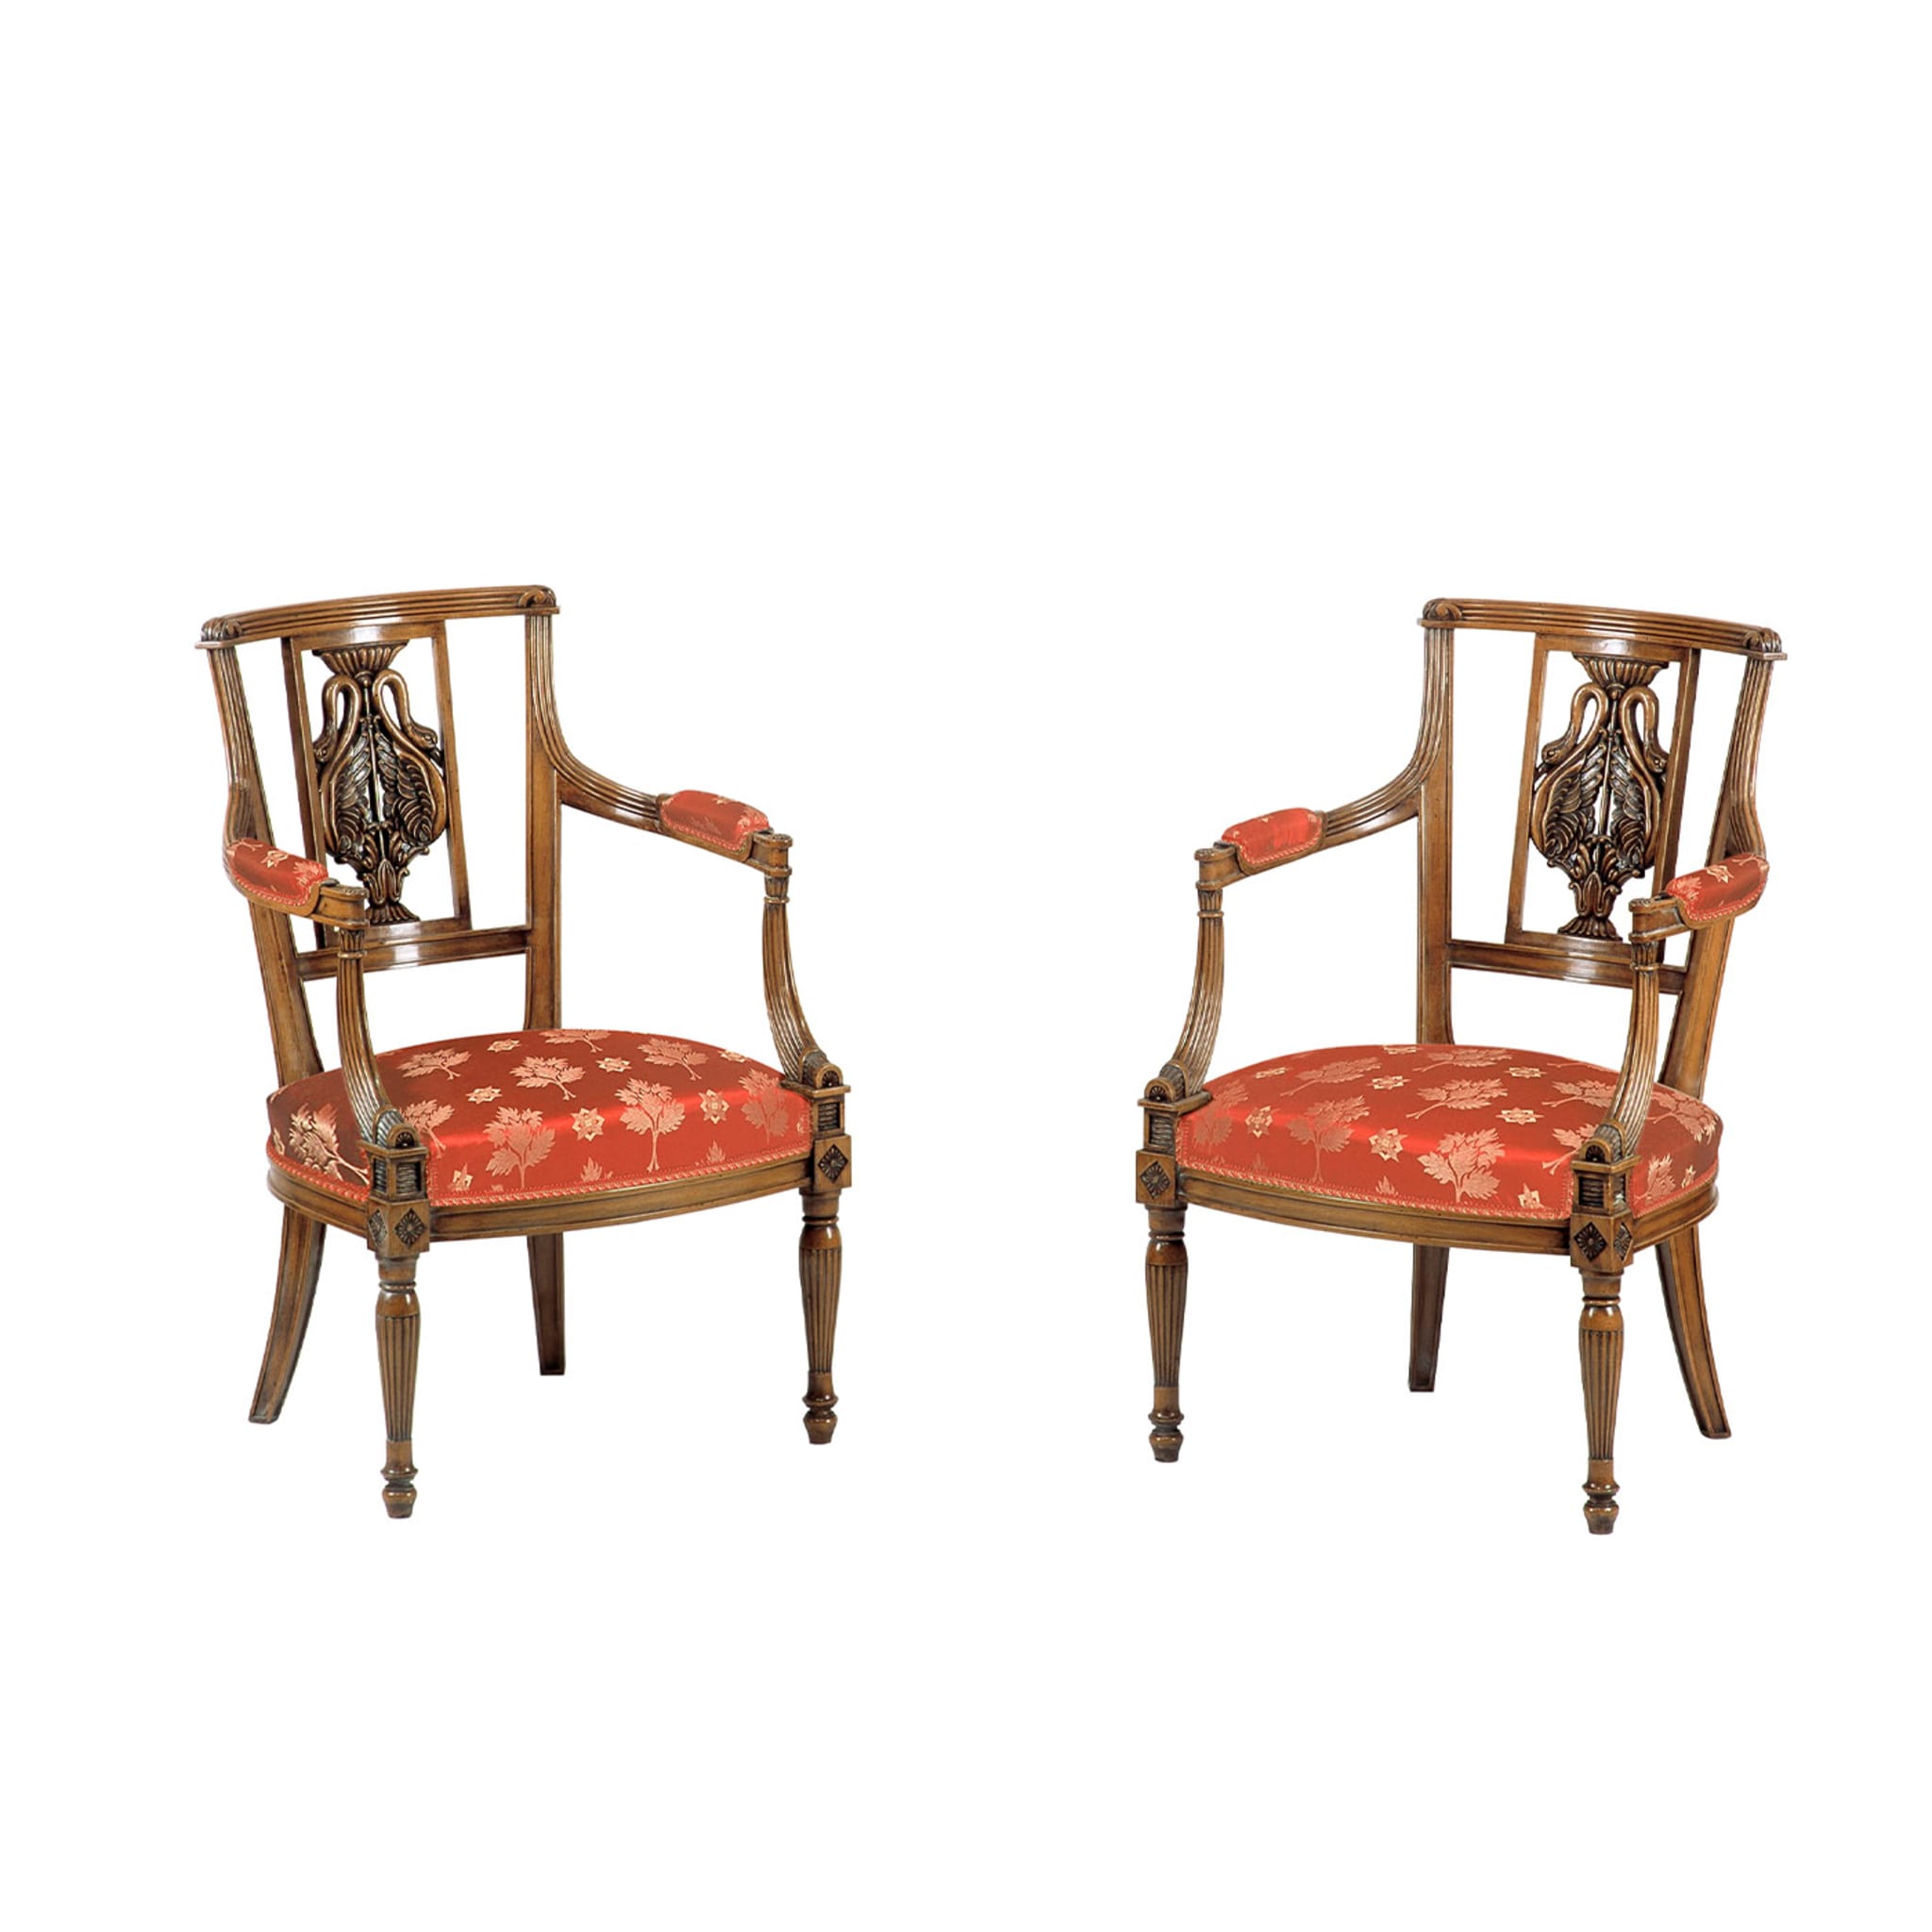 French Empire-Style Zoomorphic-Back Chair With Arms - Alternative view 1